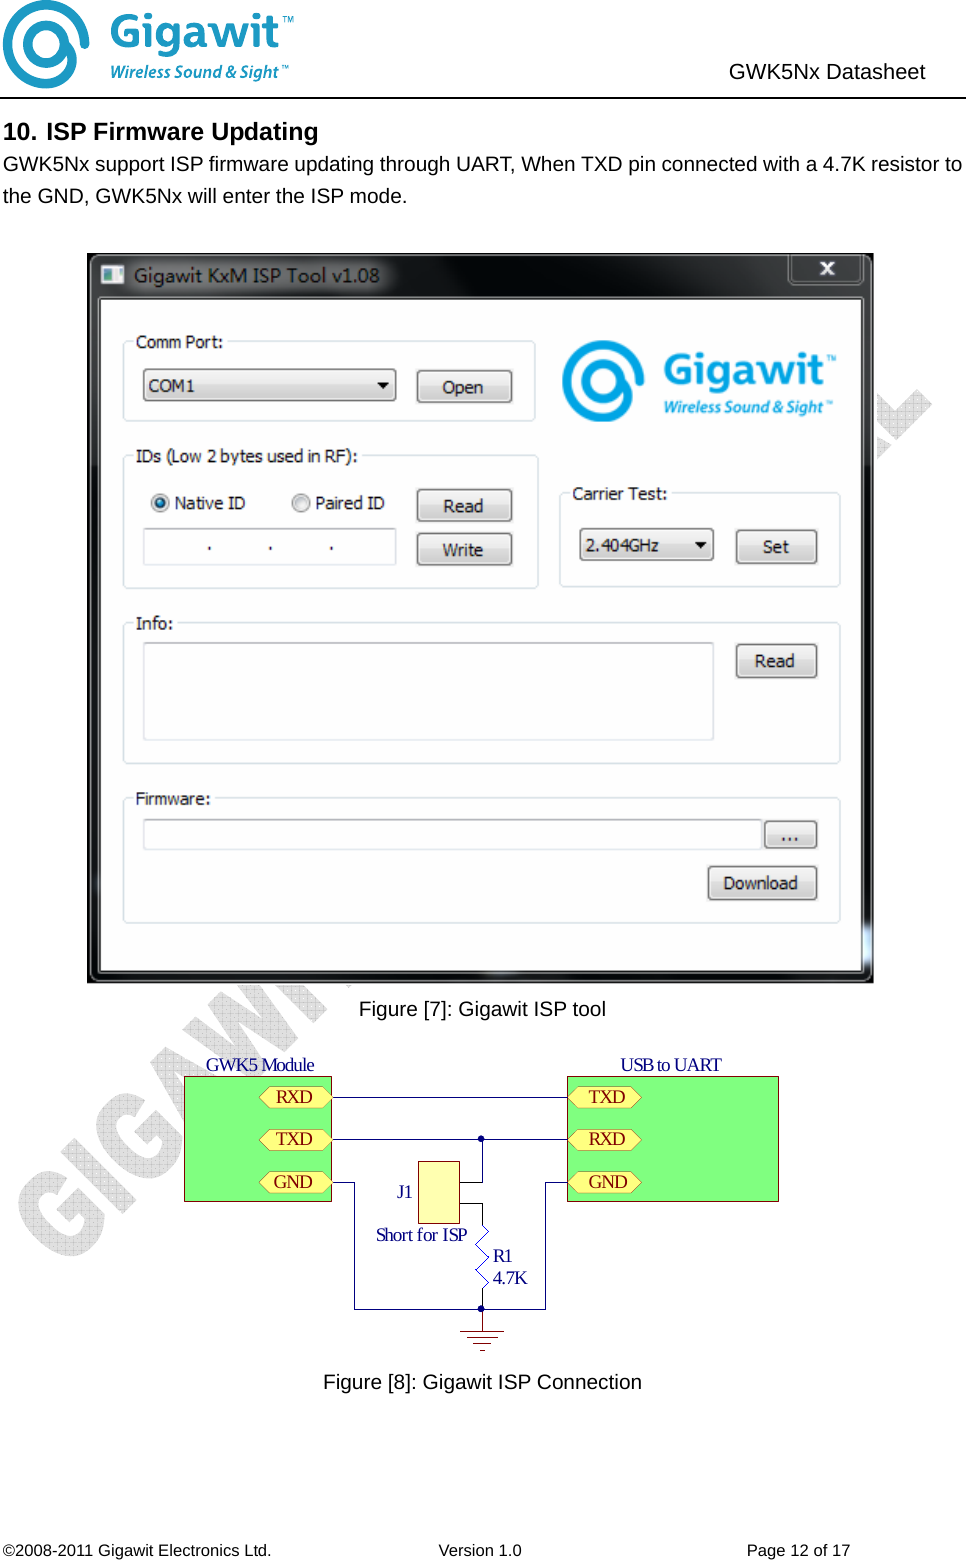                               ©2008-2011 Gigawit Electronics Ltd.                    Version 1.0                           Page 12 of 17  GWK5Nx Datasheet   10. ISP Firmware Updating GWK5Nx support ISP firmware updating through UART, When TXD pin connected with a 4.7K resistor to the GND, GWK5Nx will enter the ISP mode.     Figure [7]: Gigawit ISP tool R14.7KUSB to UARTTXDRXDGNDJ1Short for ISPGWK5 ModuleTXDRXDGND Figure [8]: Gigawit ISP Connection    